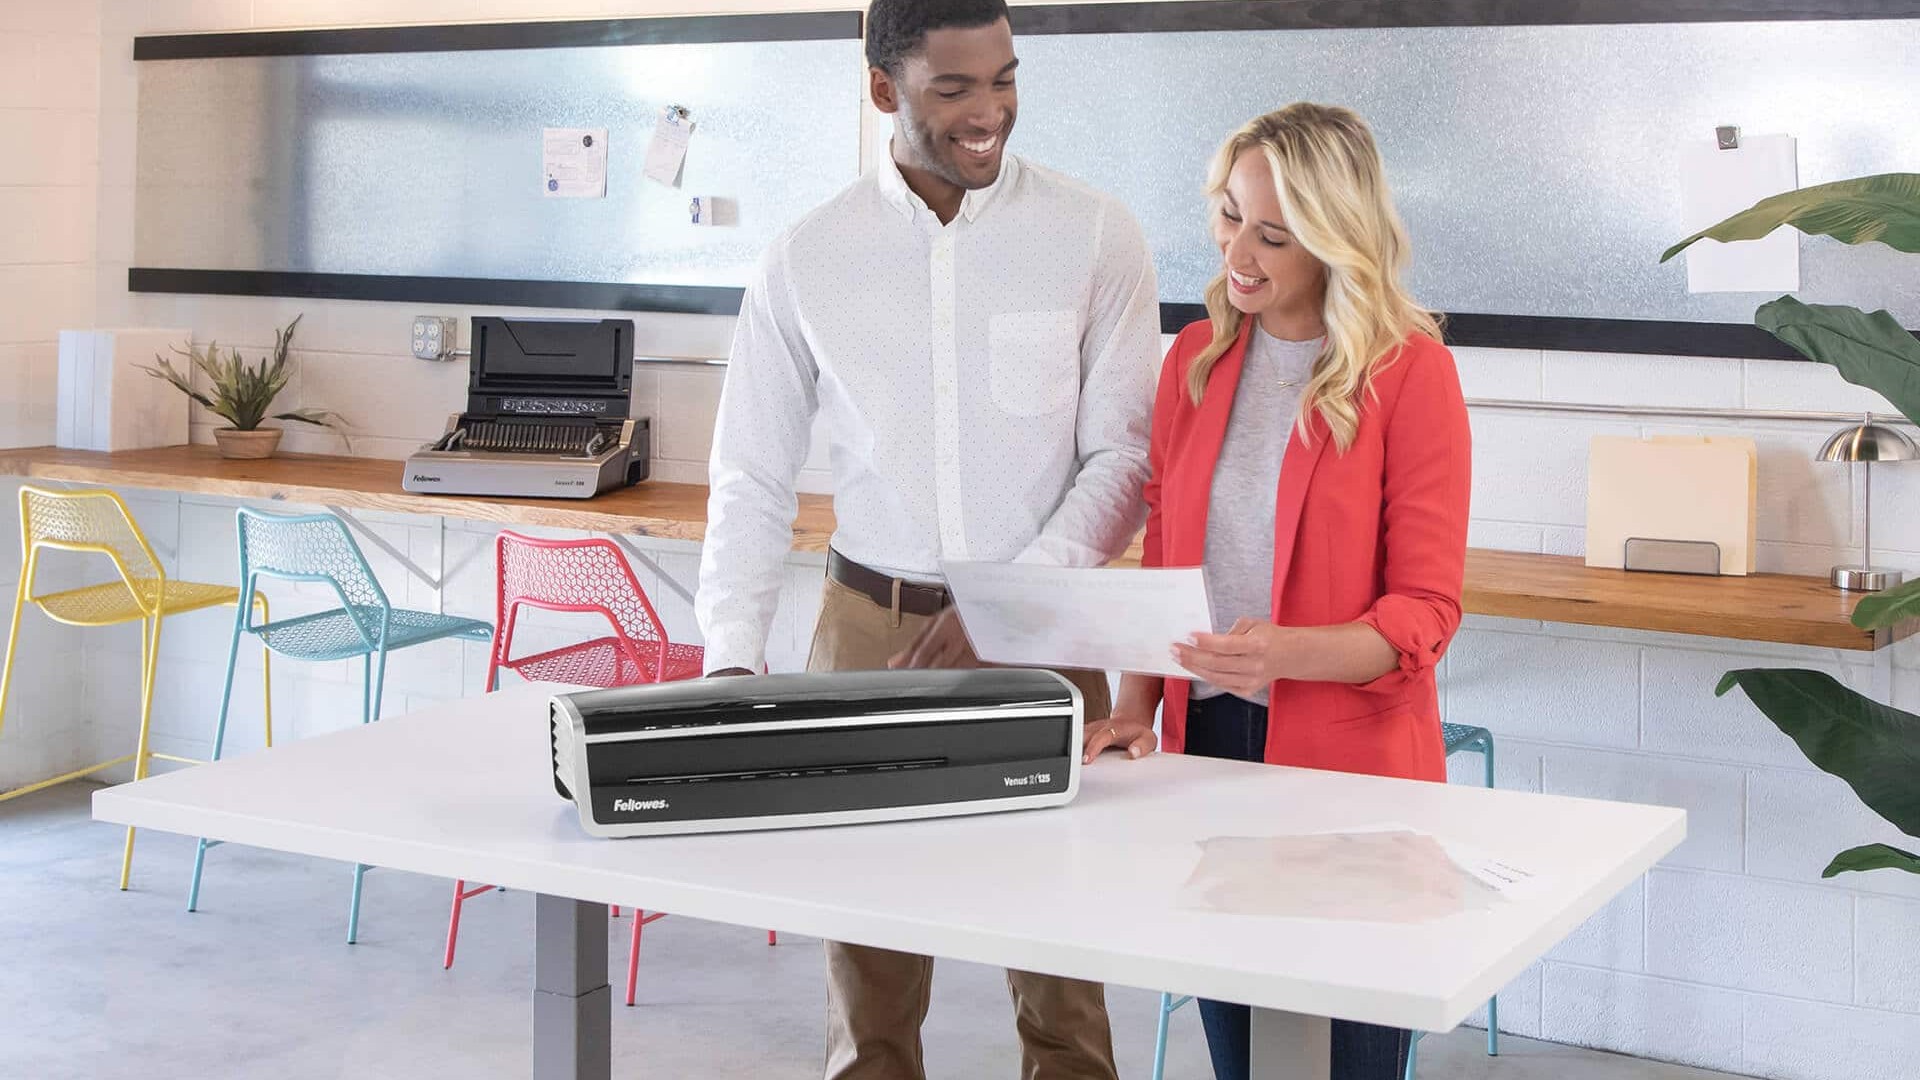 Fellowes Scanner Promotions